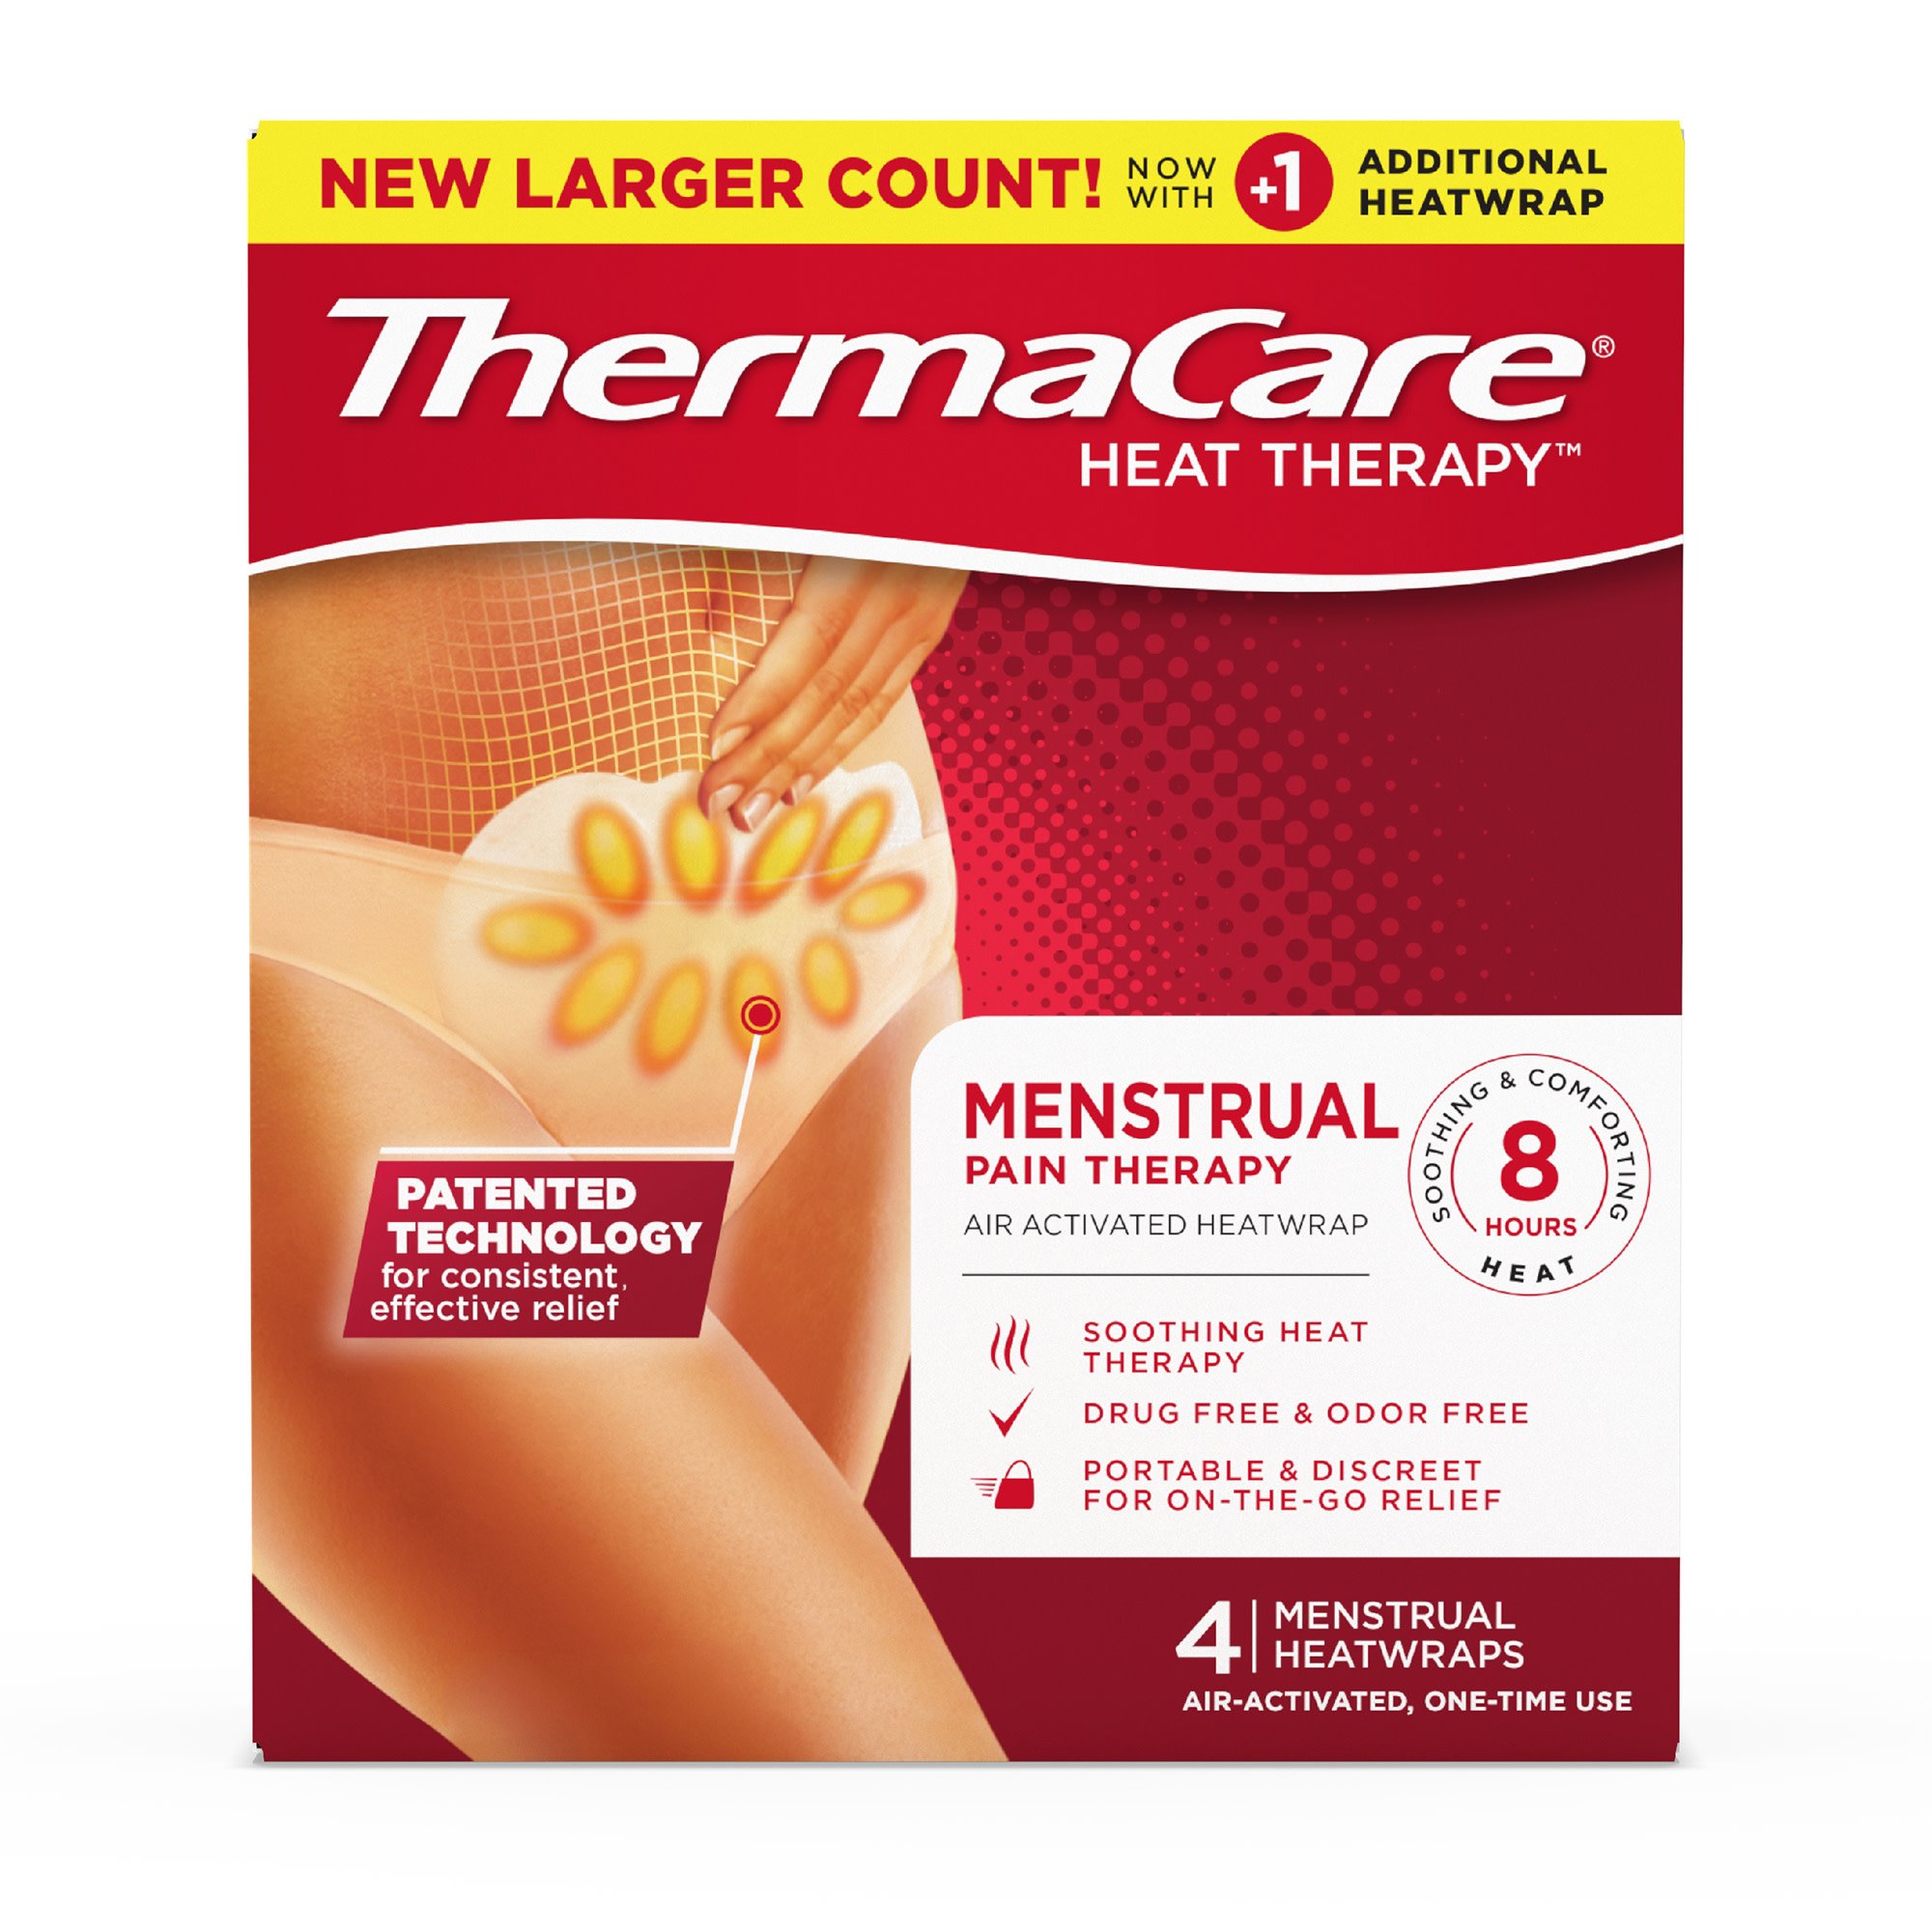 ThermaCare Neck Pain Therapy, Wrist & Shoulder Pain Relief Heat Wraps - 3  ct